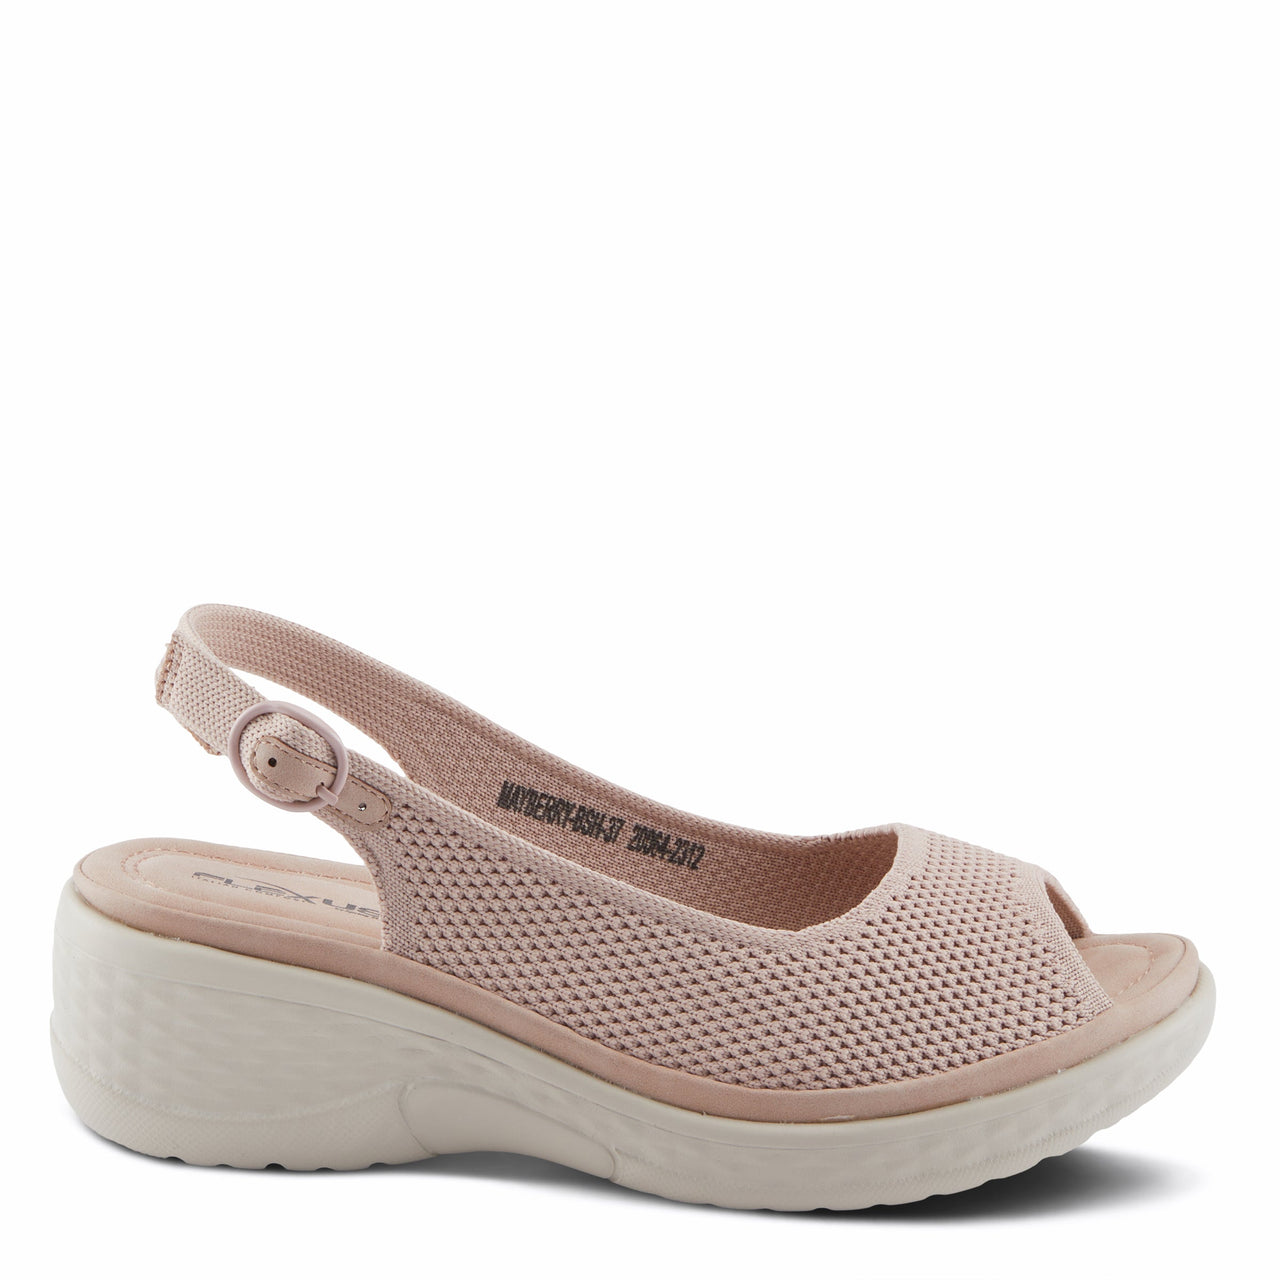 Spring Step Shoes Flexus Mayberry Sandals: Comfortable and stylish sandals for women, perfect for all-day wear